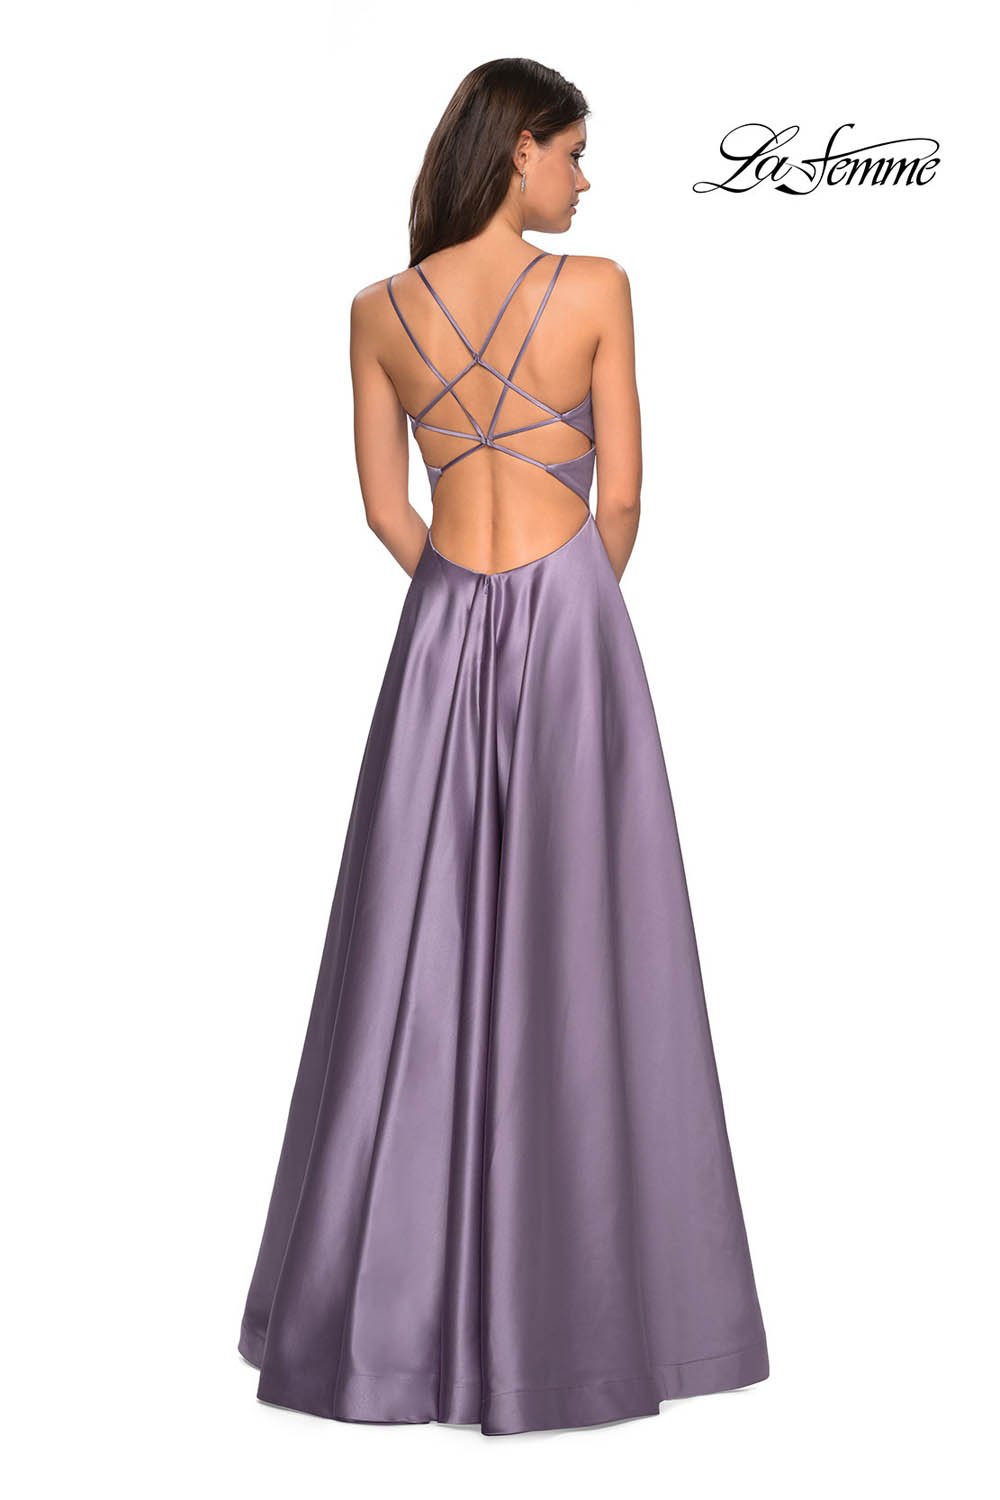 La Femme 26994 dress images in these colors: Blush, Dark Berry, Deep Red, Lavender Gray, Navy, Sapphire Blue.